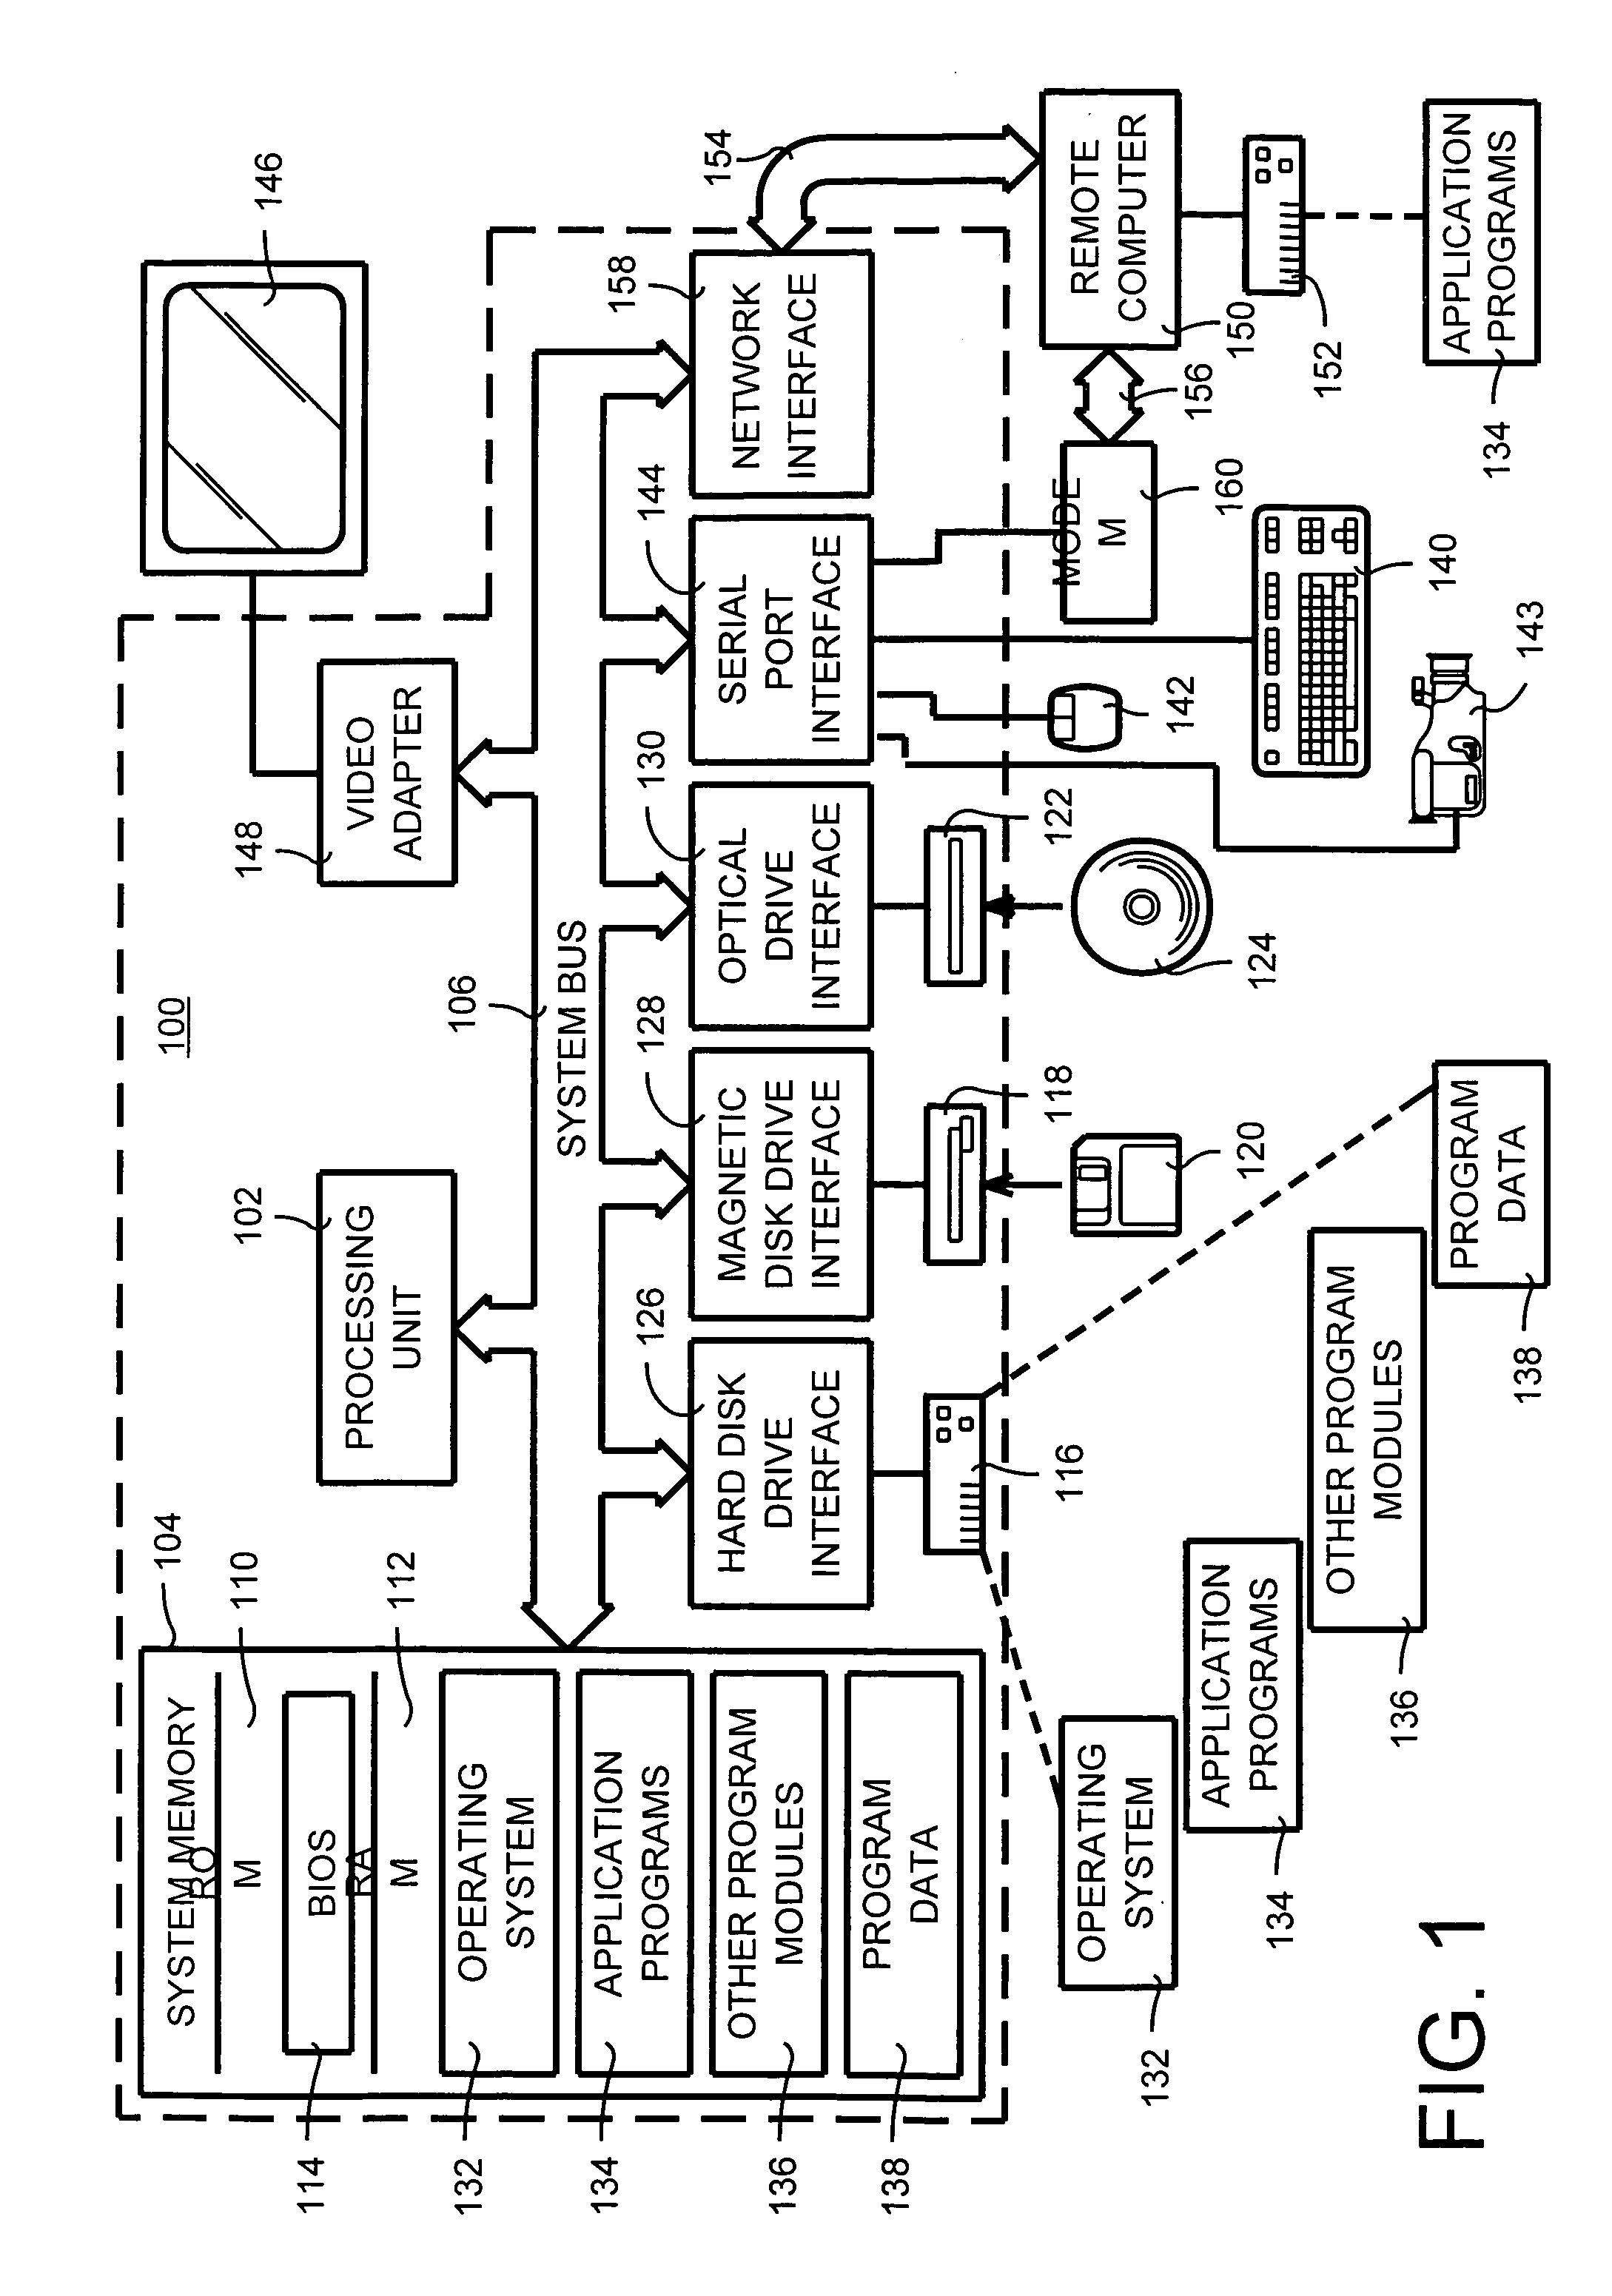 System and method for progressive stereo matching of digital images